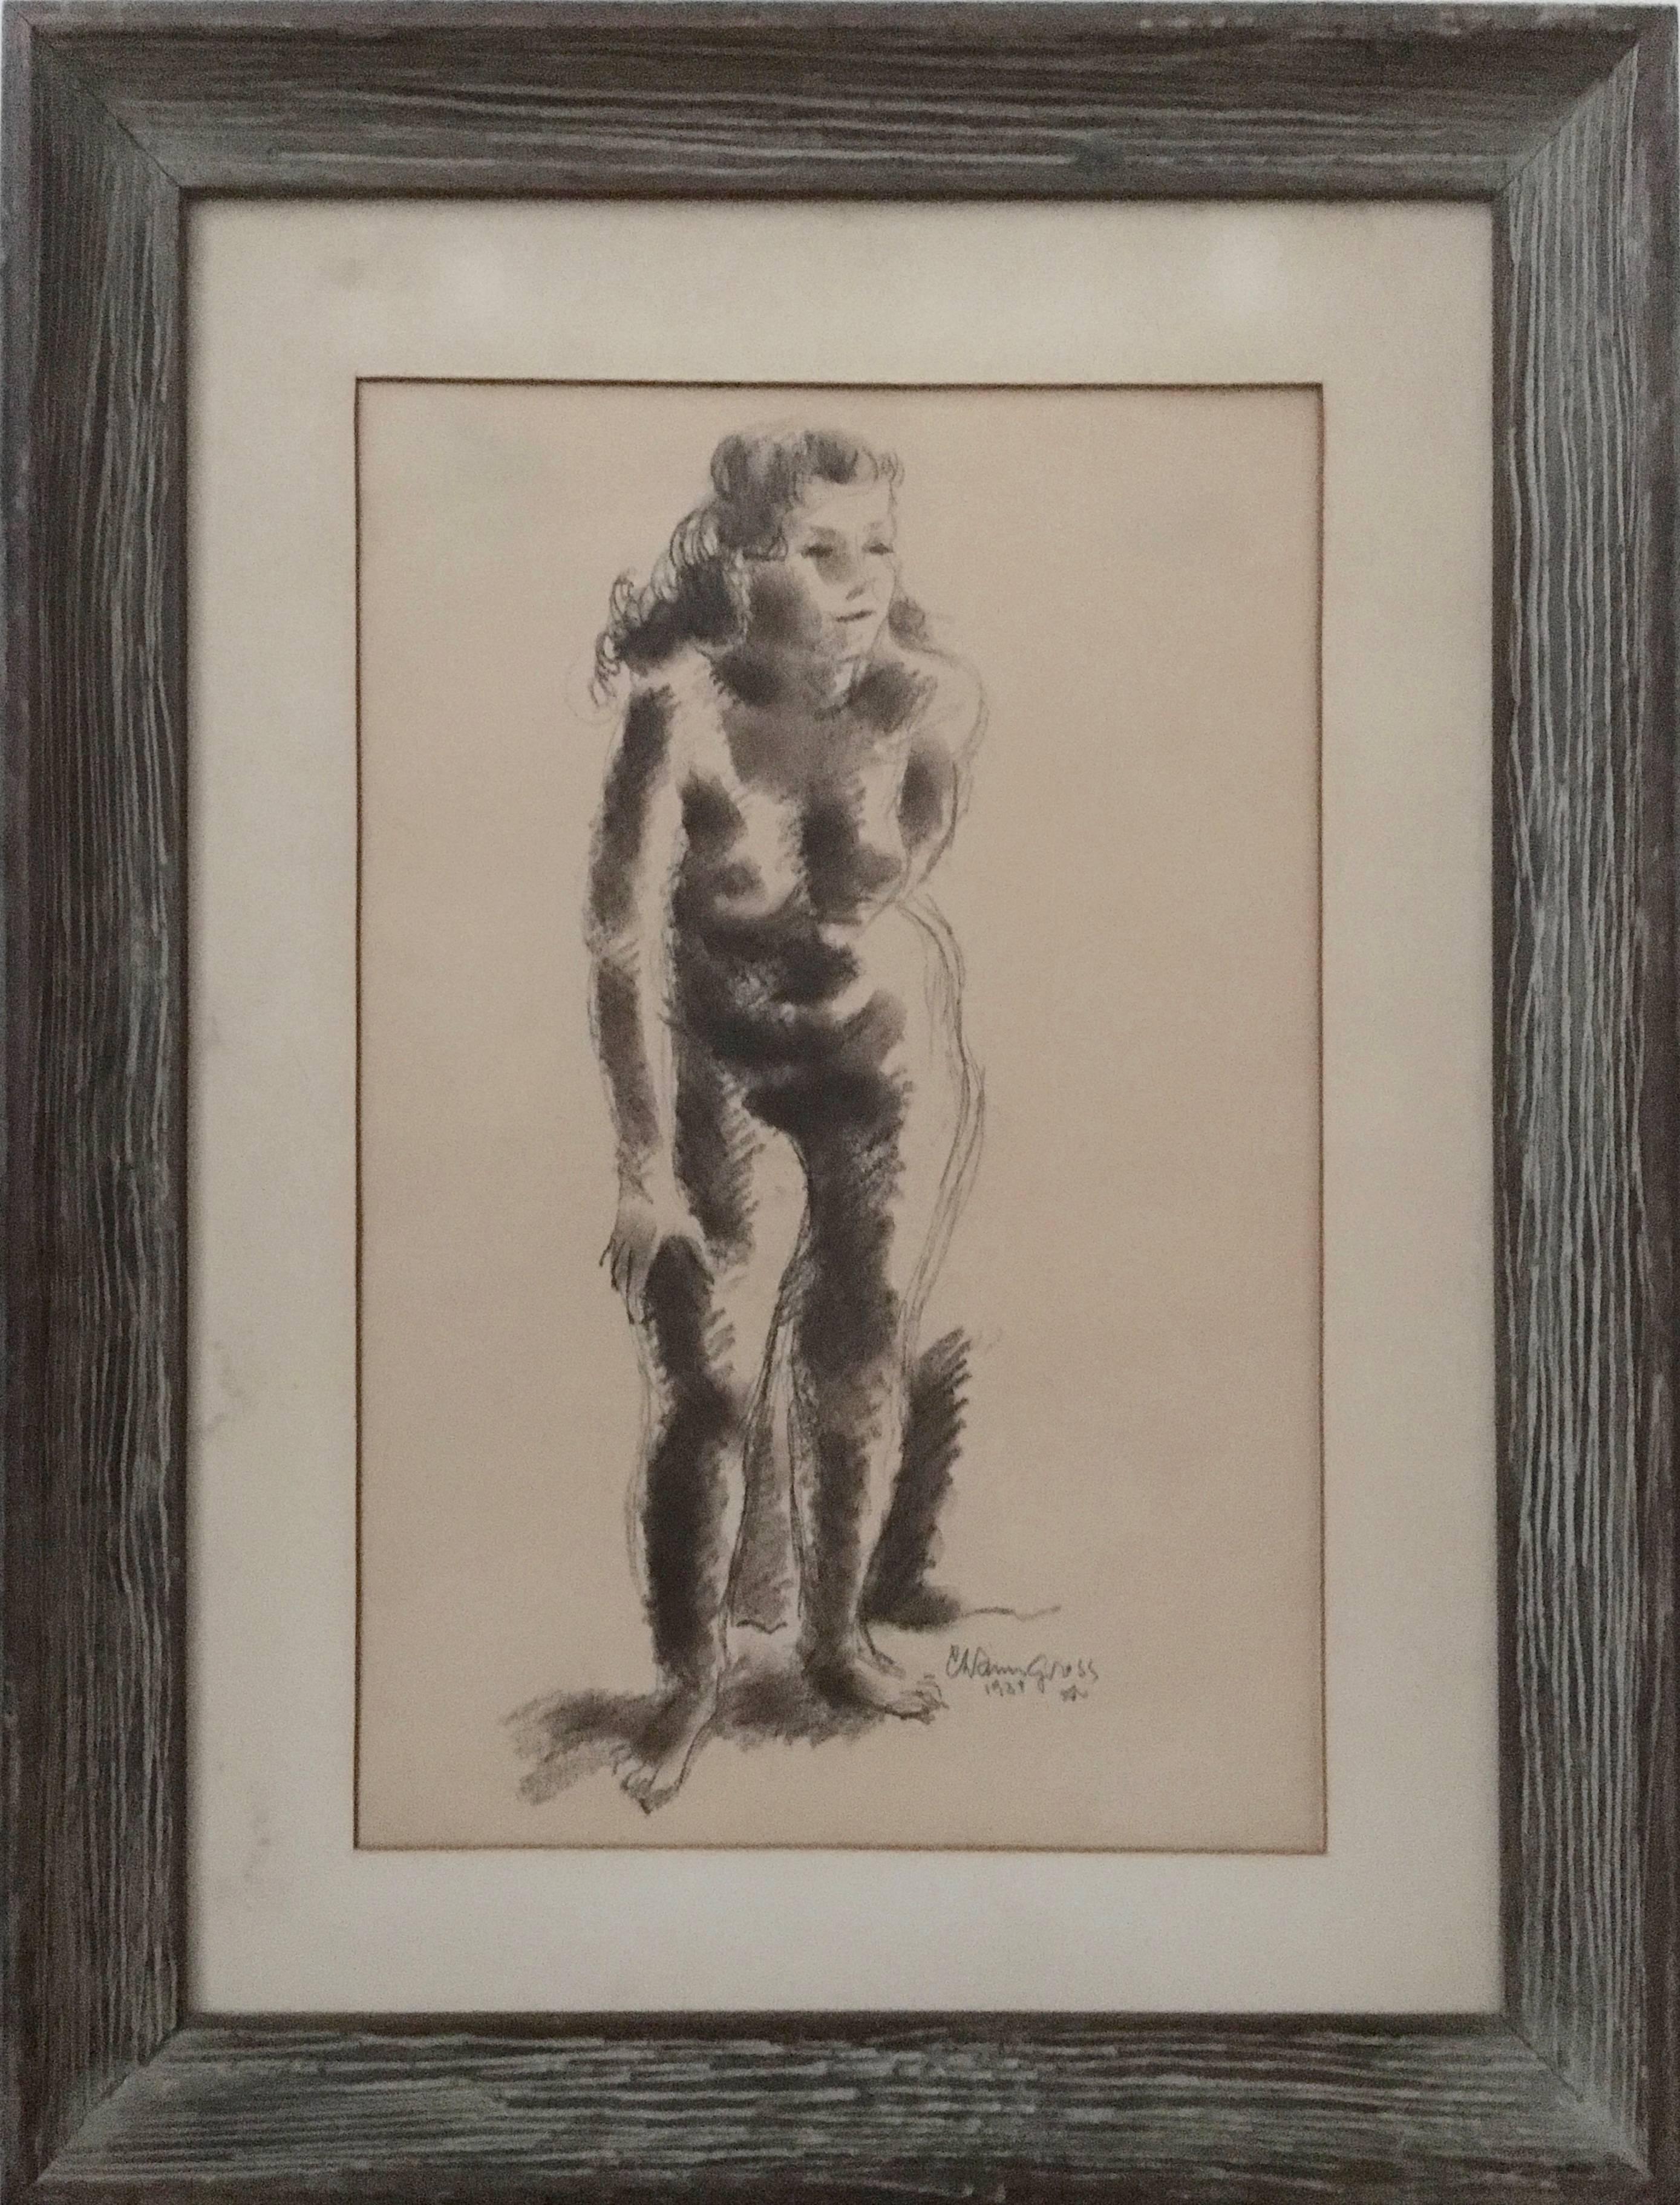 Rare Early Nude Drawing American Modernist Sculptor 